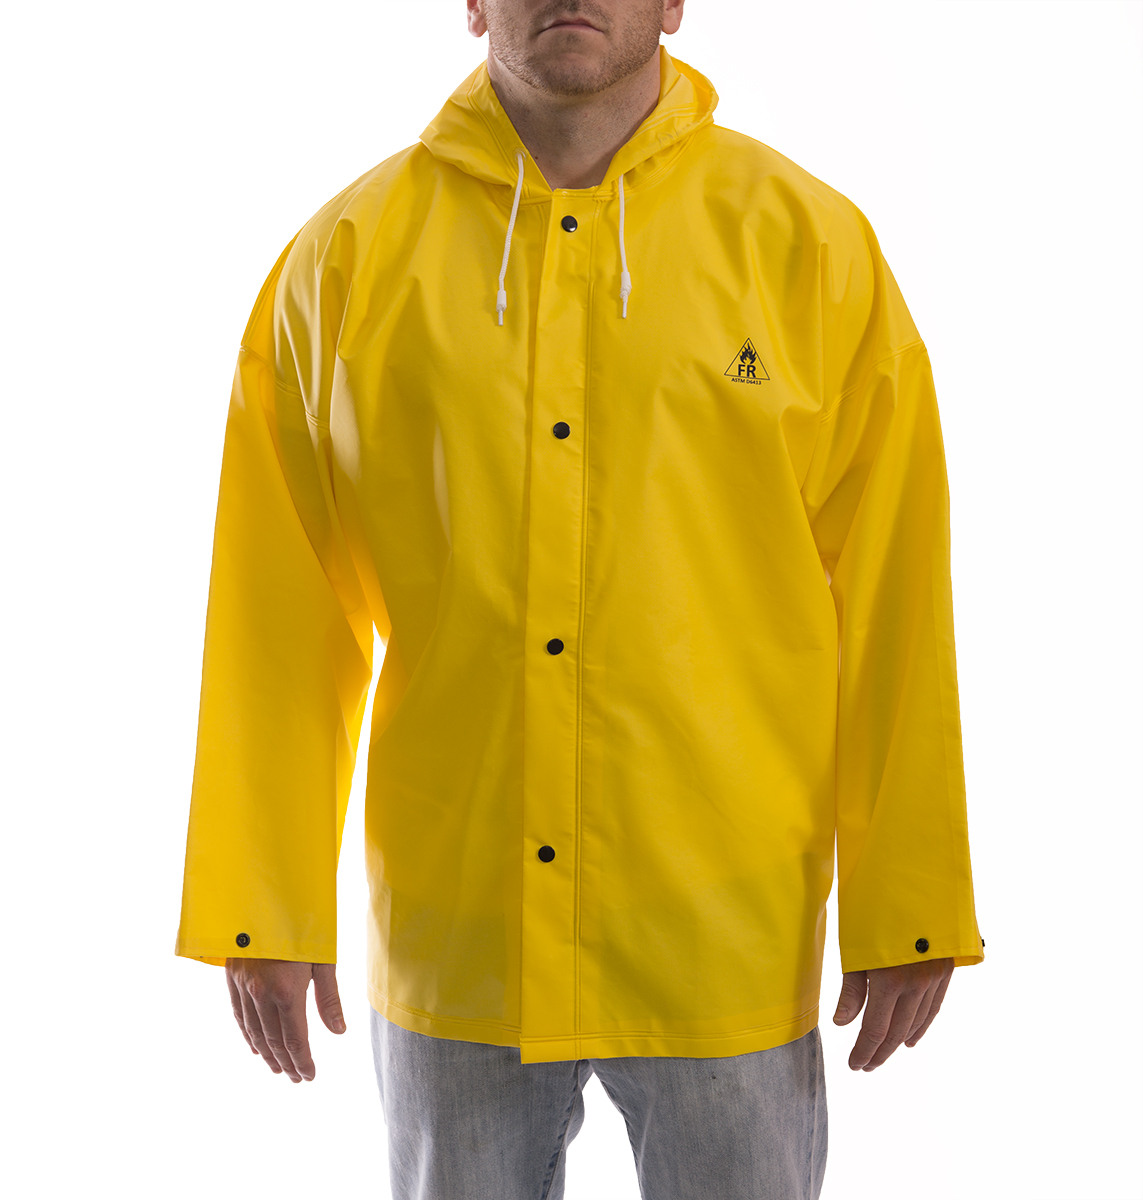 DuraScrim™ Yellow Jacket with Attached Hood - Rain Wear